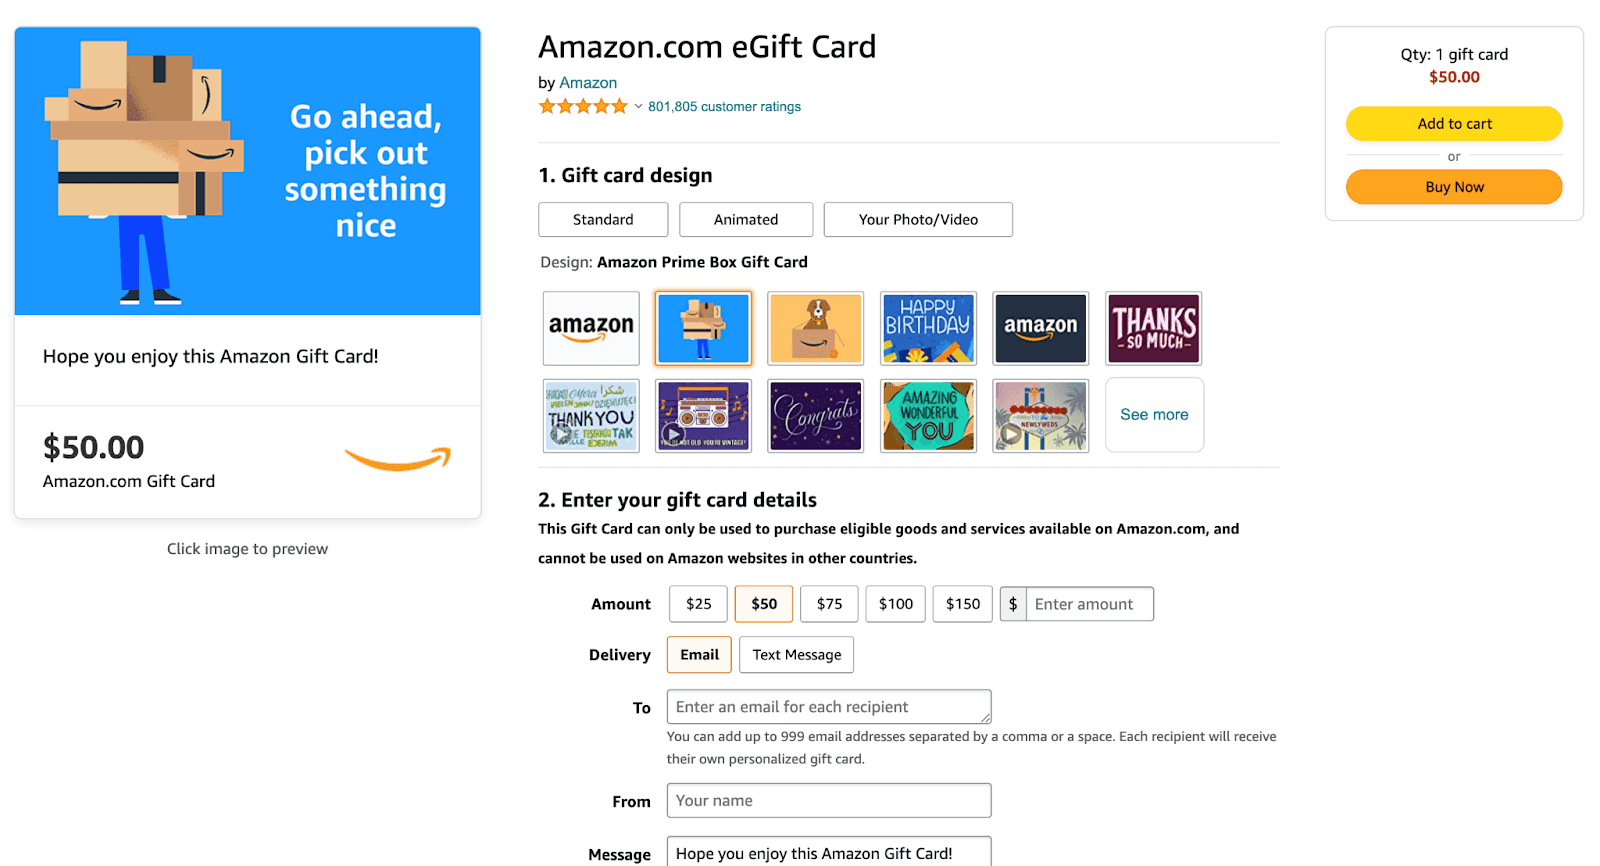 Screenshot of Amazon's website listing of an Amazon gift card